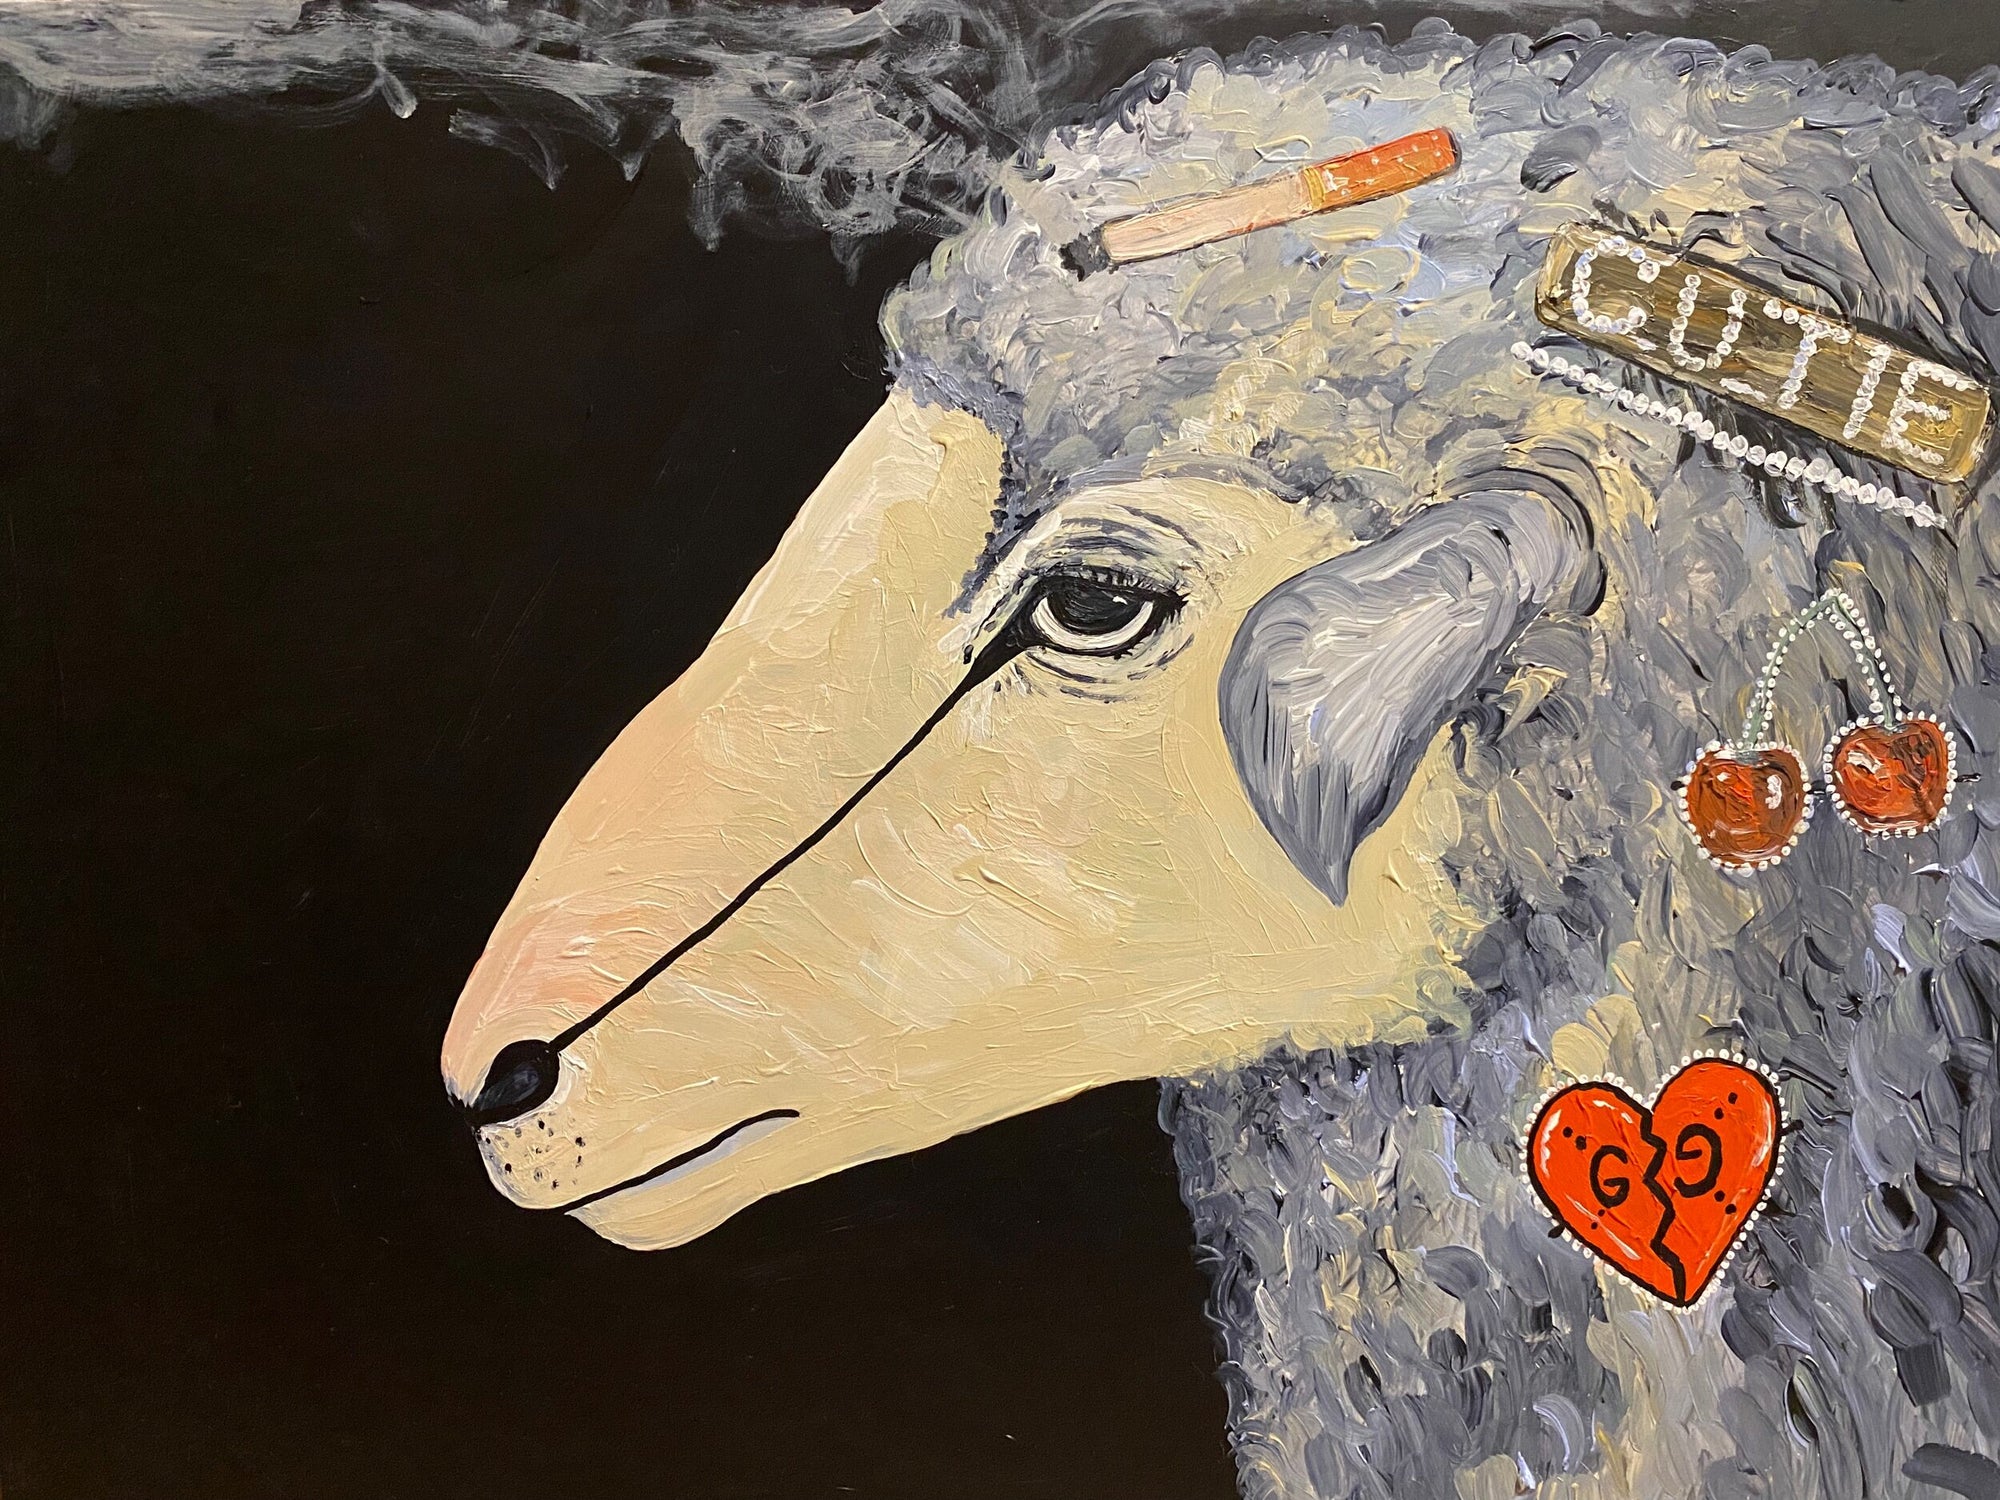 image of a sheep with pins in its wool that include cherries, a heart, the word cutie, and a cigarette on its head